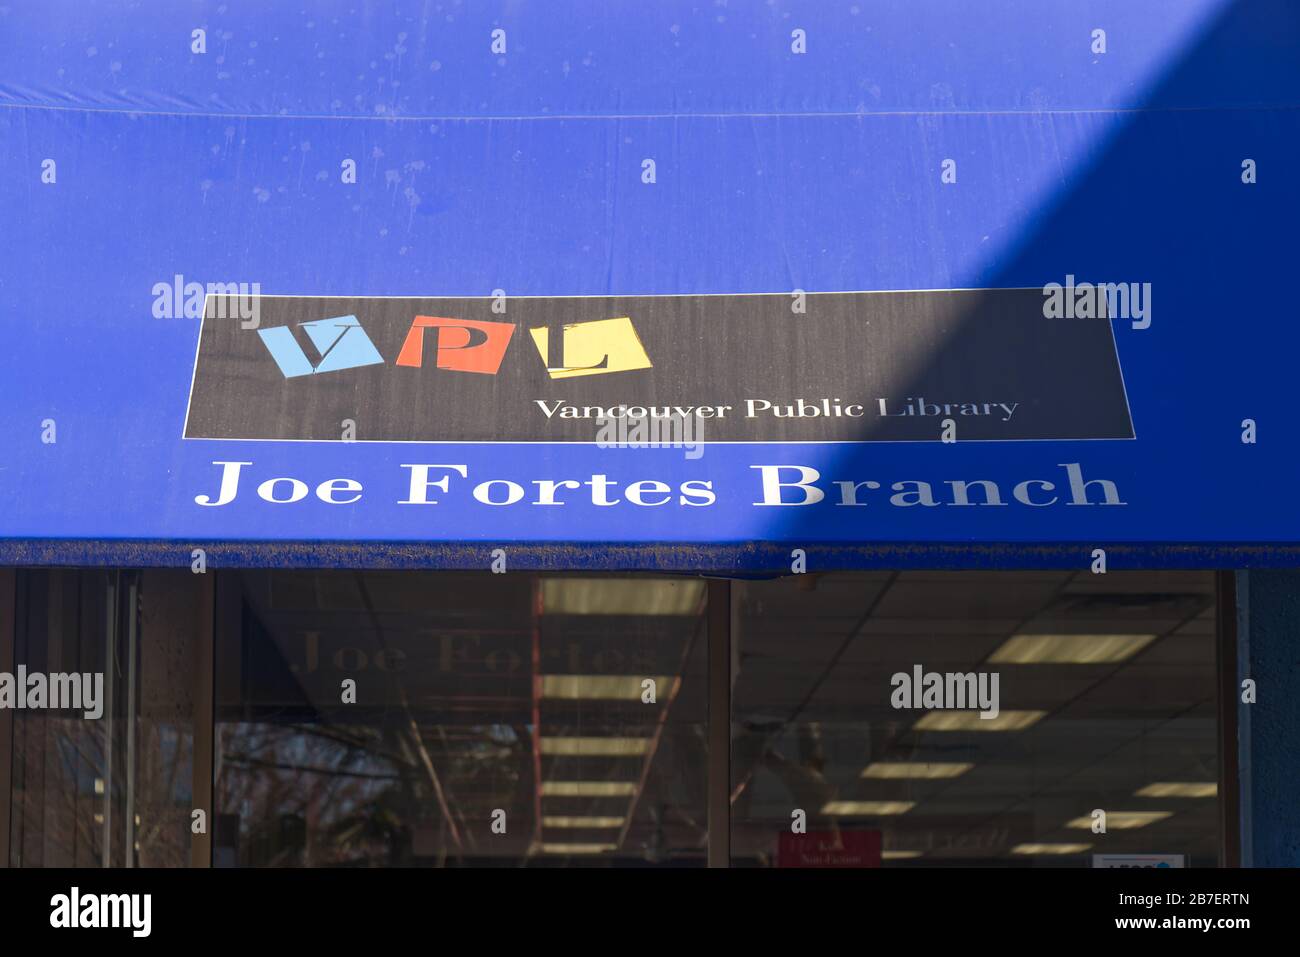 Vancouver, Canada - March 15, 2020: View of entrance of Vancouver Public Library 'Joe Fortes Branch' on 870 Denman Street in Vancouver Stock Photo